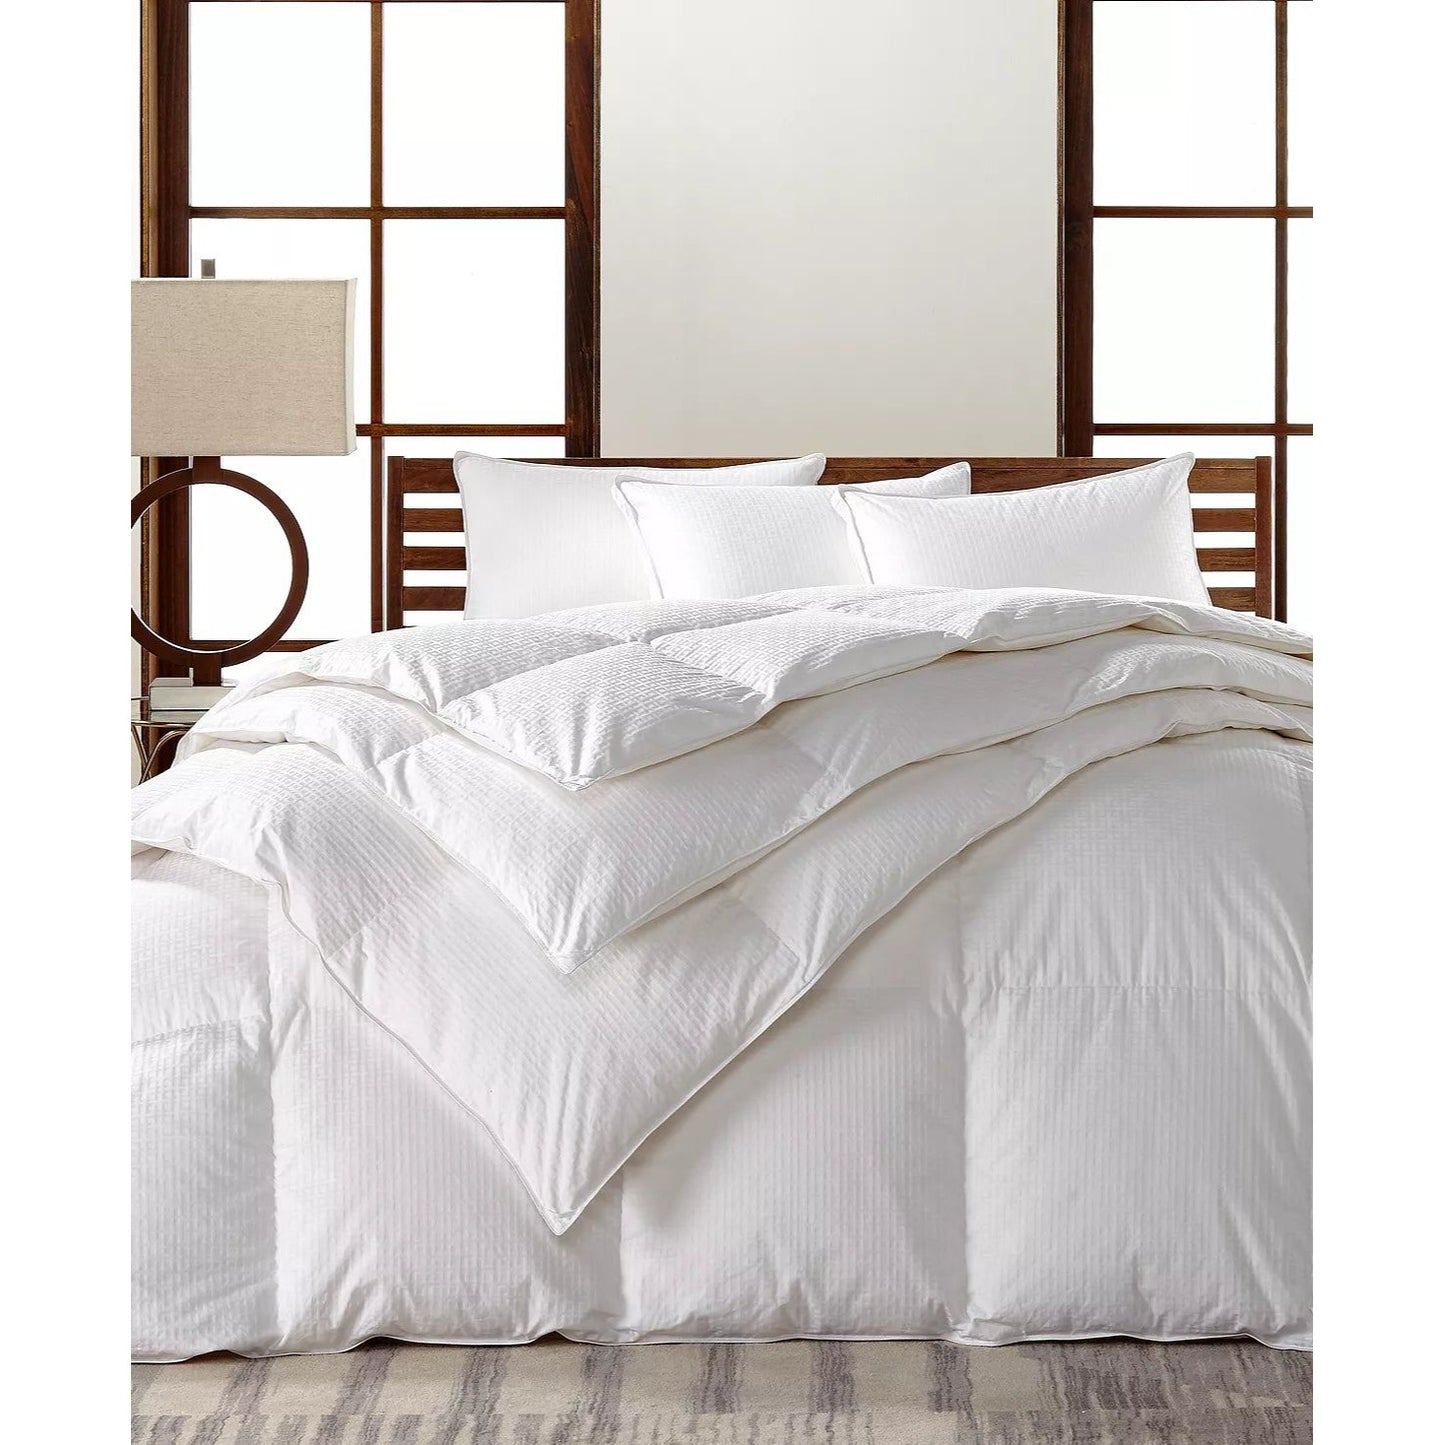 HOTEL COLLECTION European White Goose Down Lightweight King Comforter, Hypoallergenic UltraClean Down, Created for Macy's